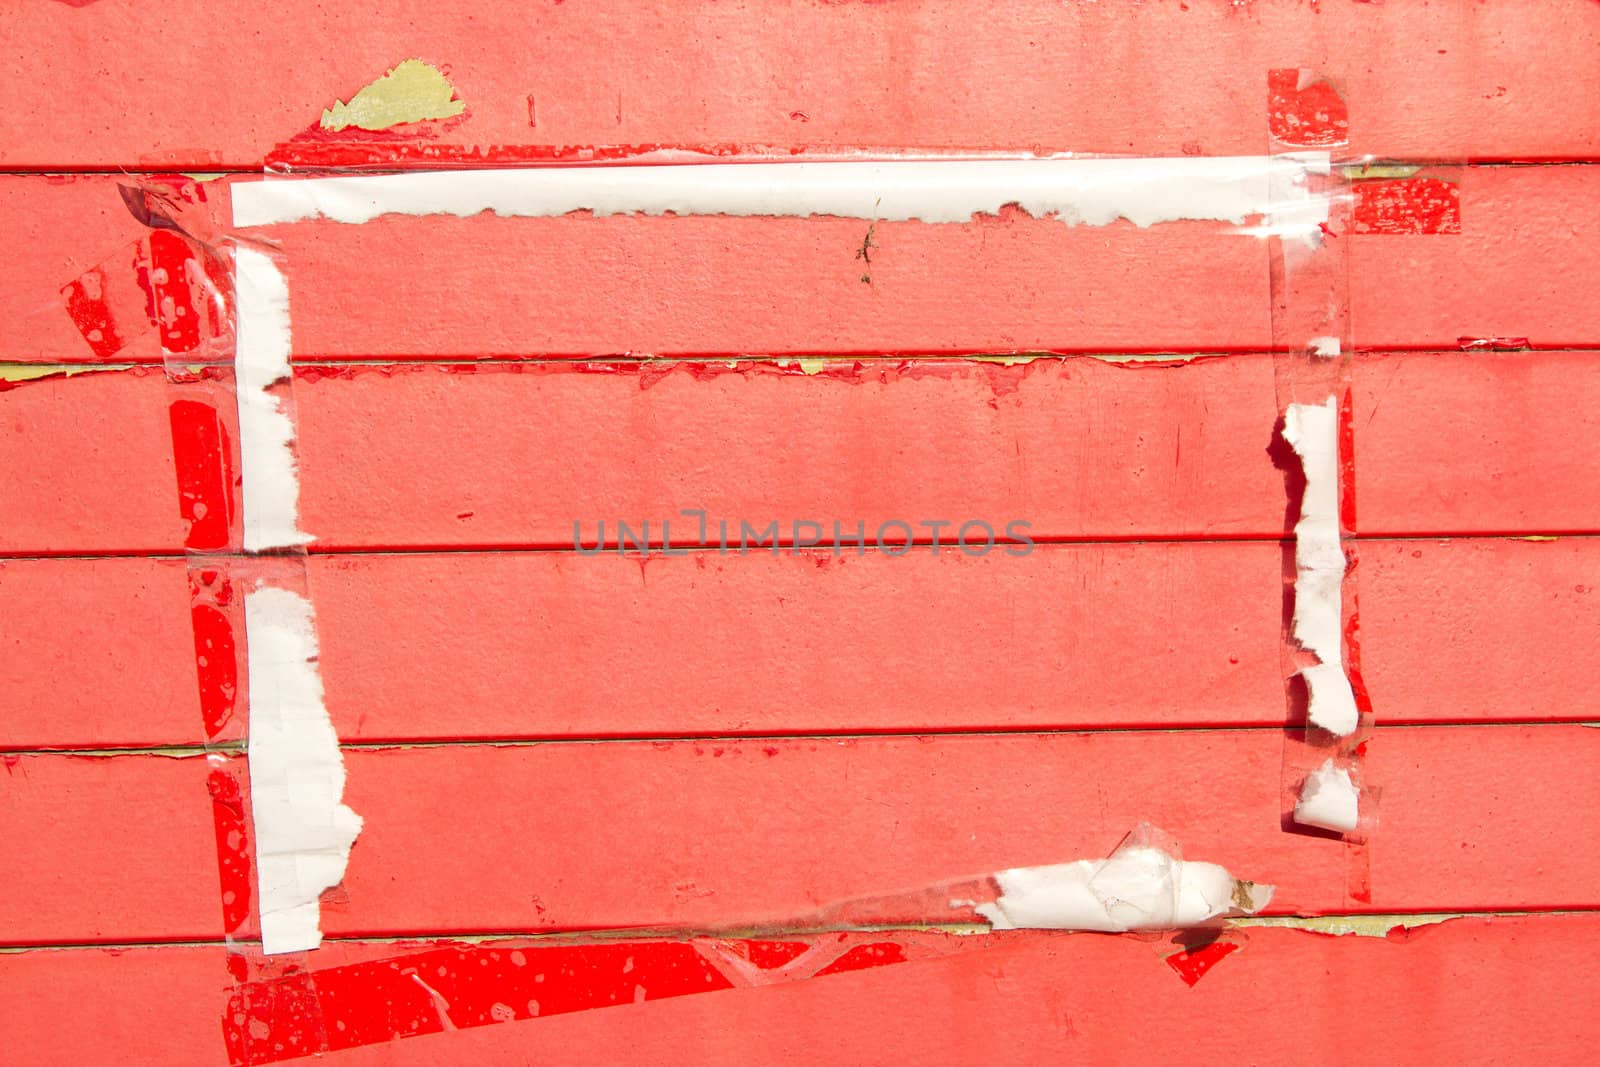 Wooden horizontal slats painted red with areas of flaking paint and a framed area with a paper and tape surround.